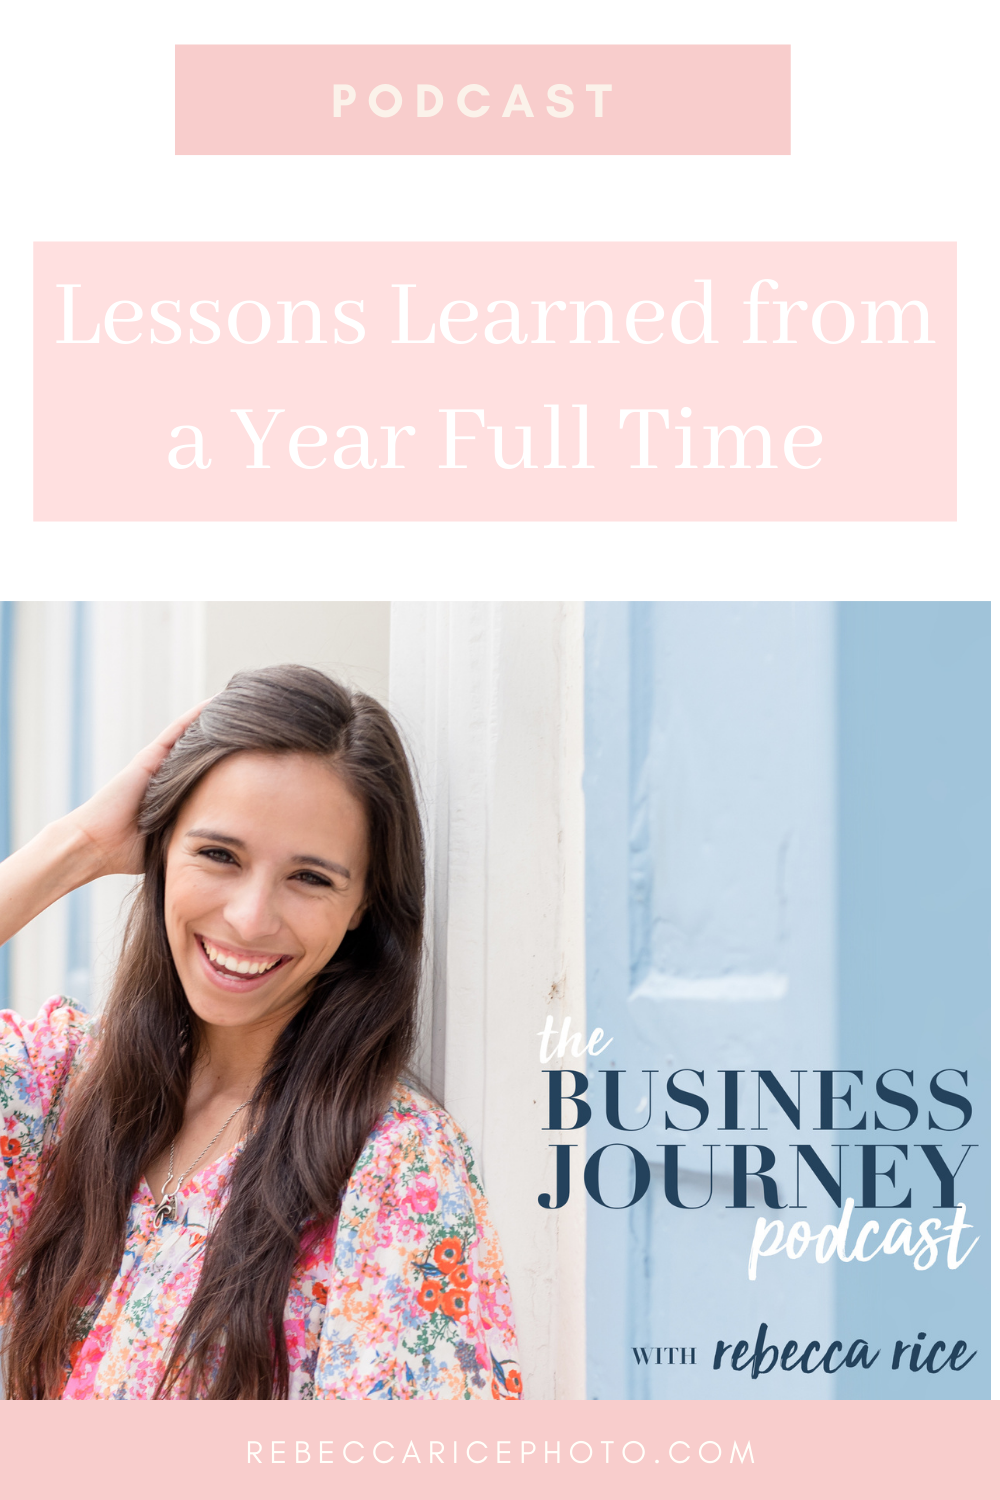 lessons from running business full-time for a year